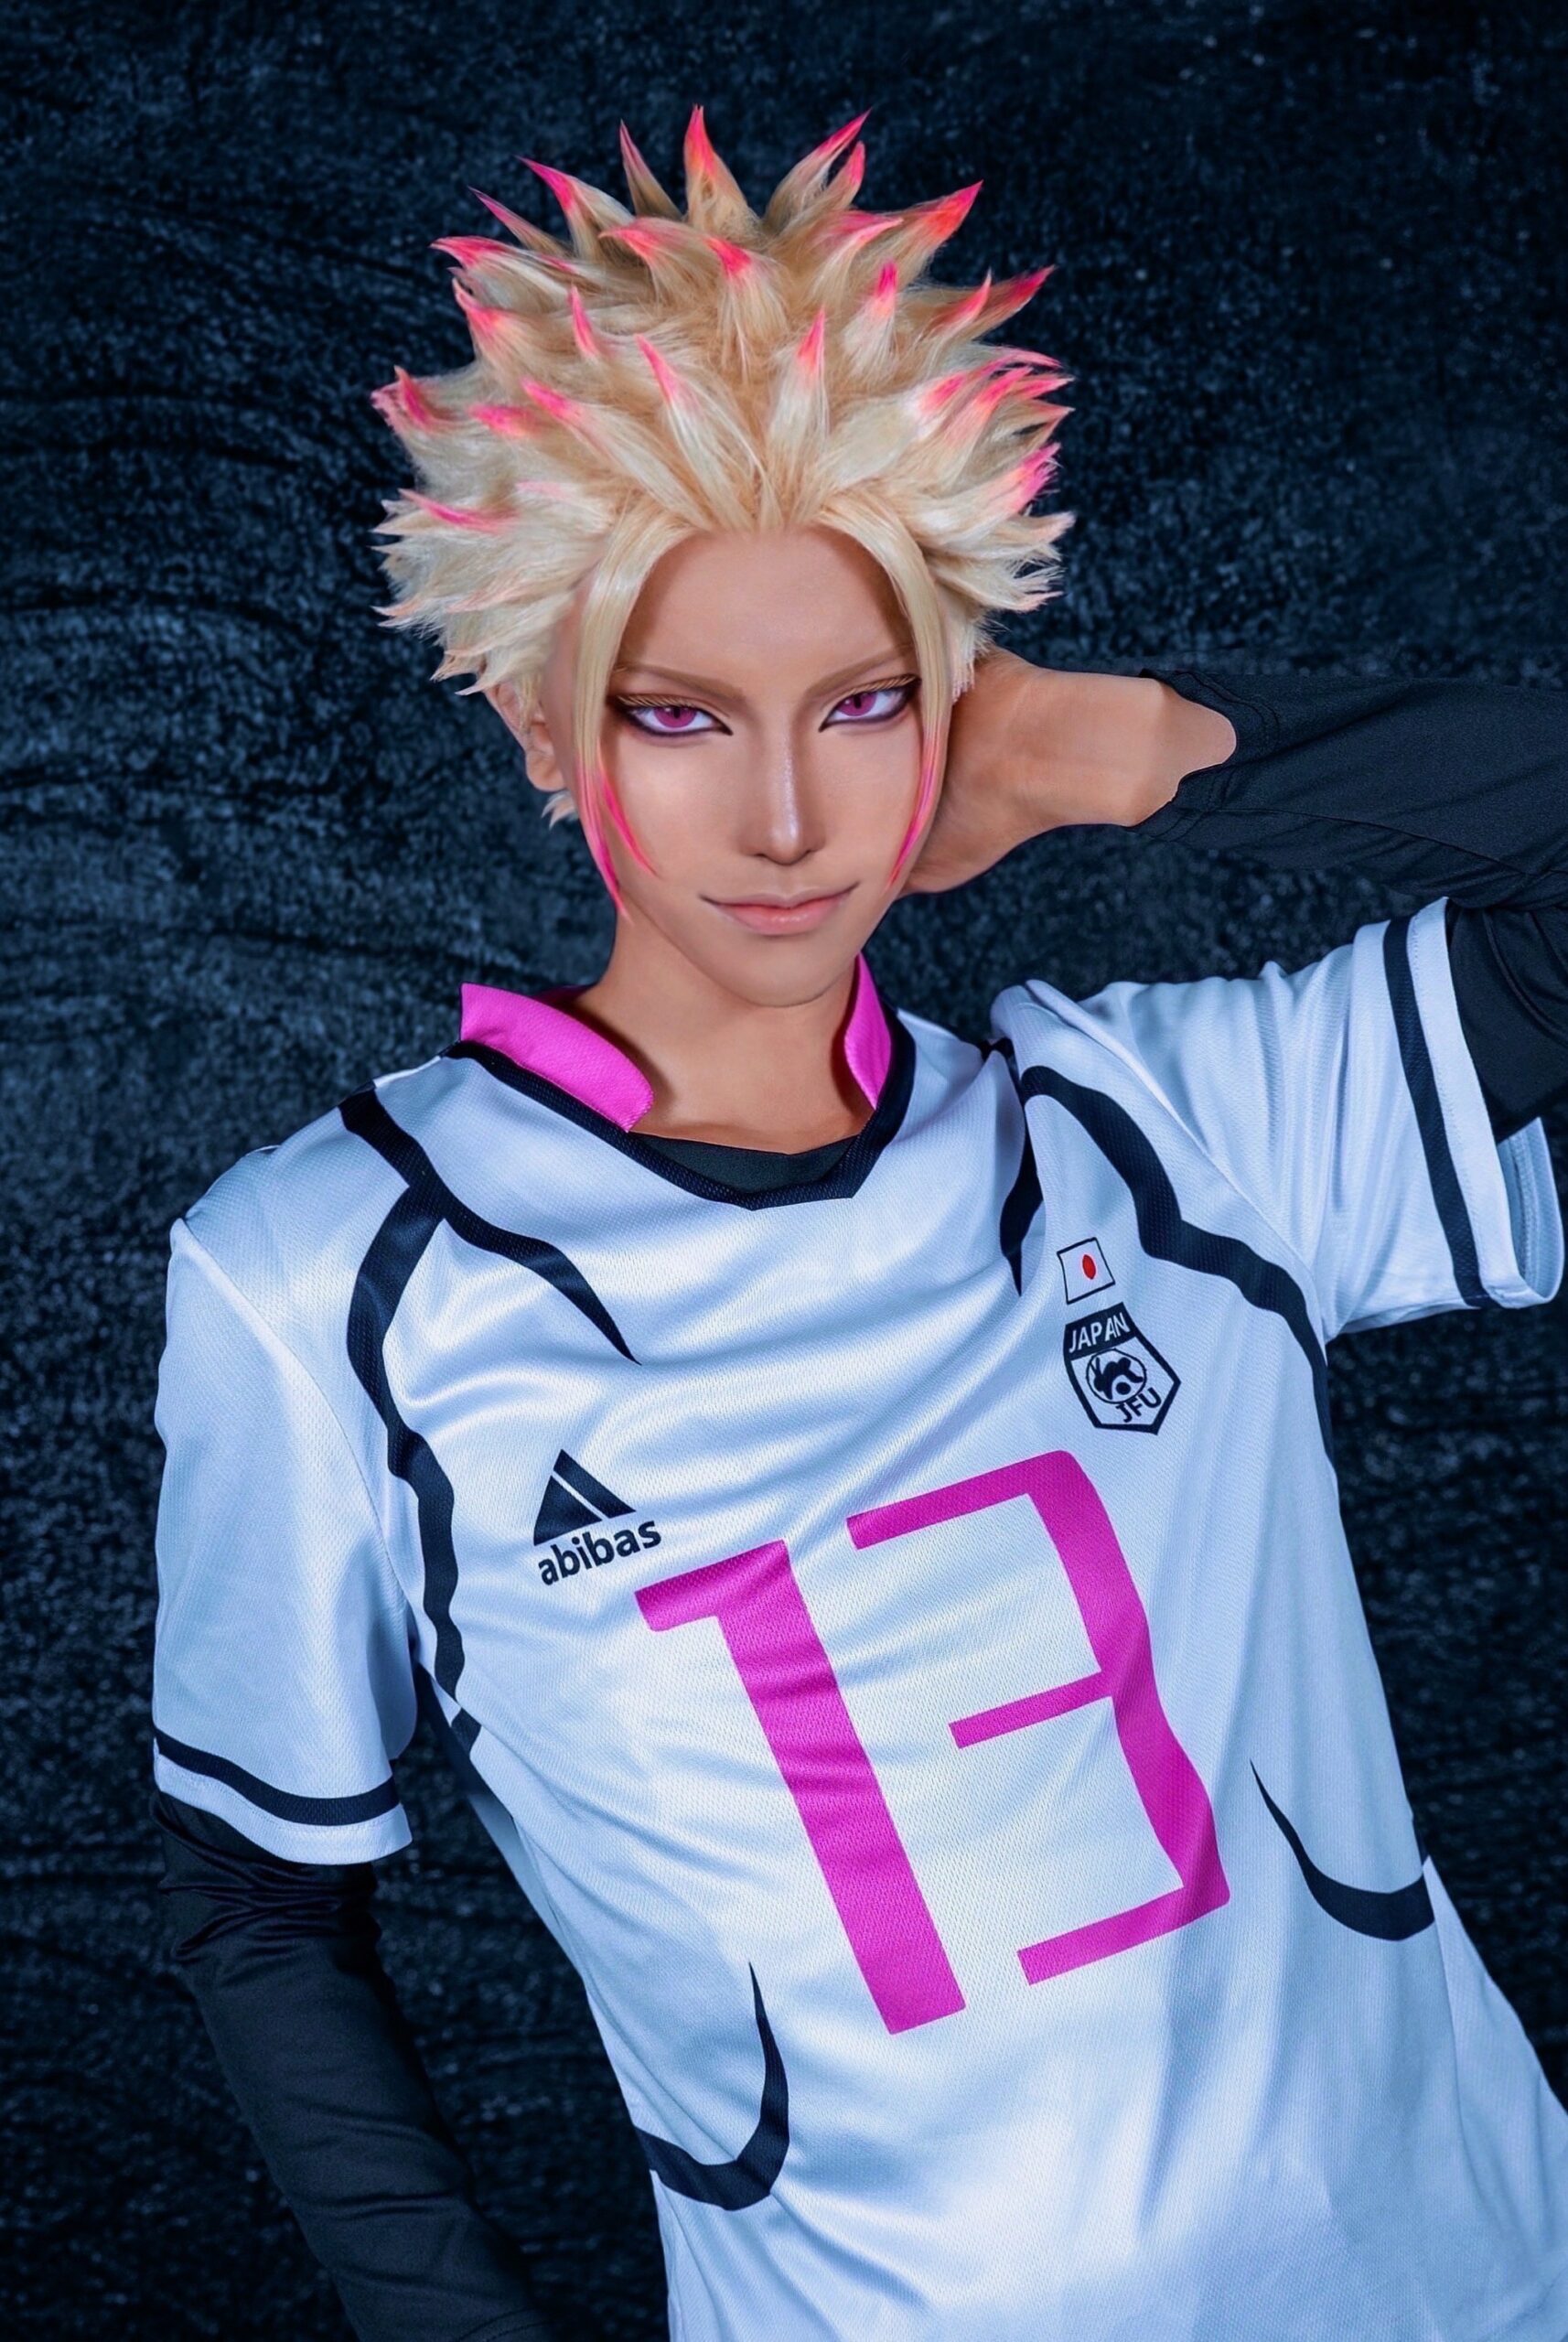 Blue Lock – Japan National Team Cosplay Jersey (5 Designs) Cosplay & Accessories